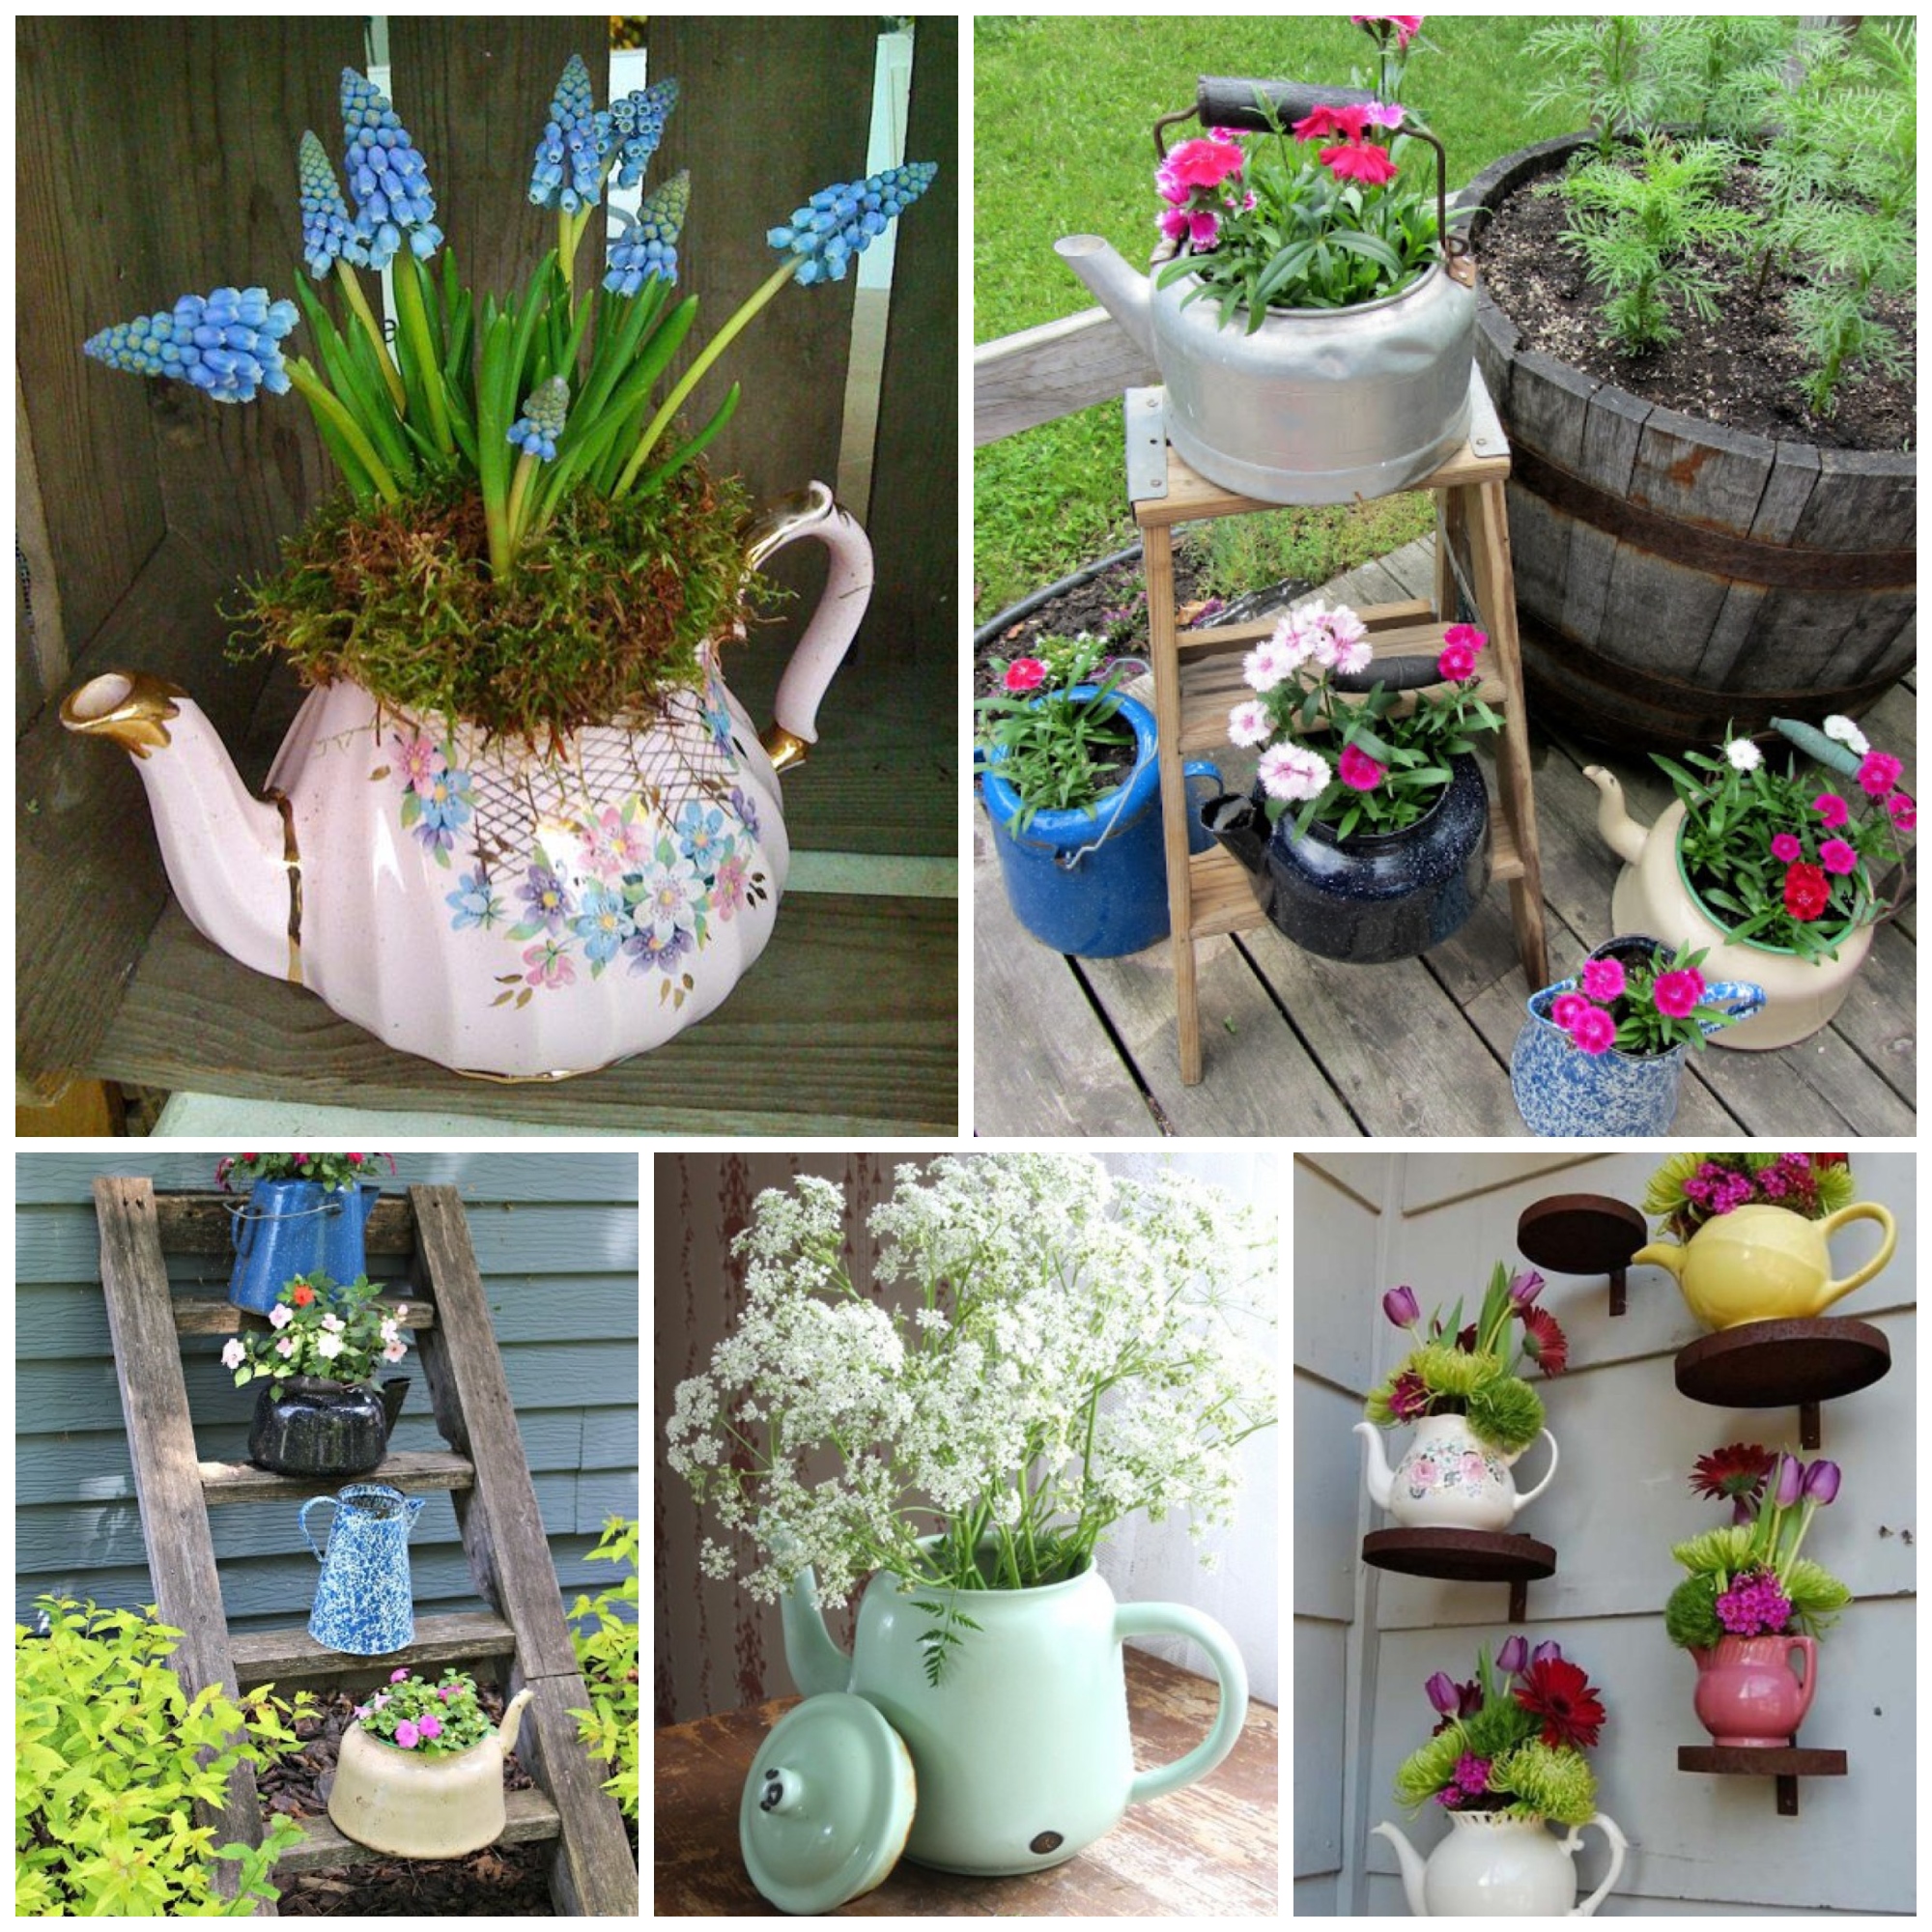 22 Unique DIY pots from old teapots that you can make by yourself